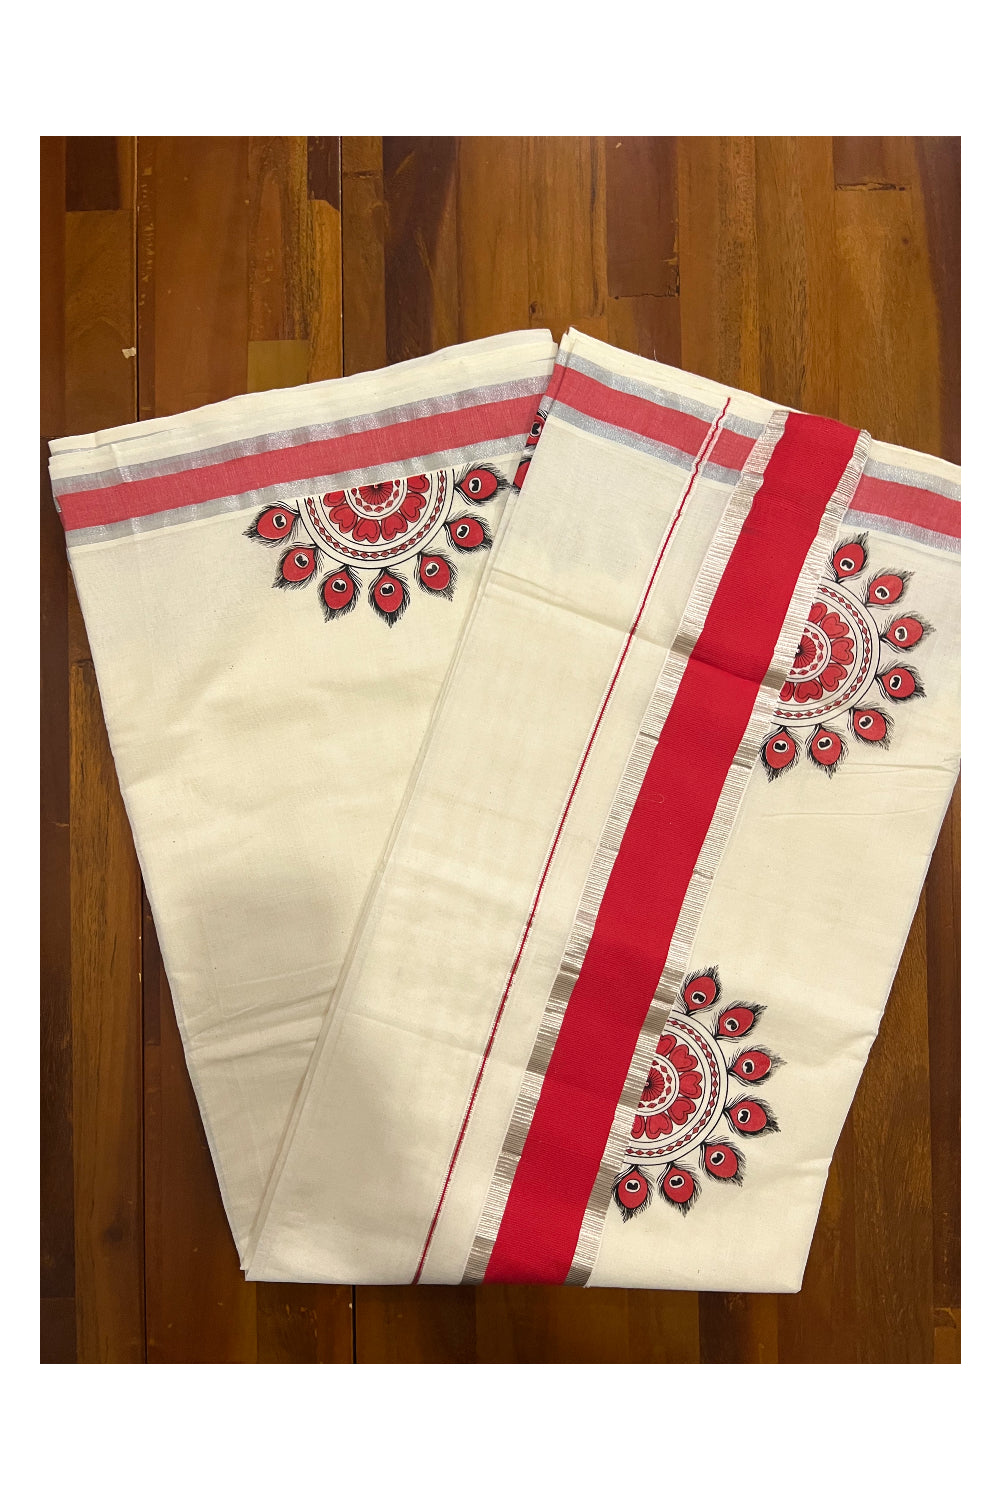 Pure Cotton Kerala Saree with Mural Printed Red Feather Semi Circle in Red and Silver Kasavu Border